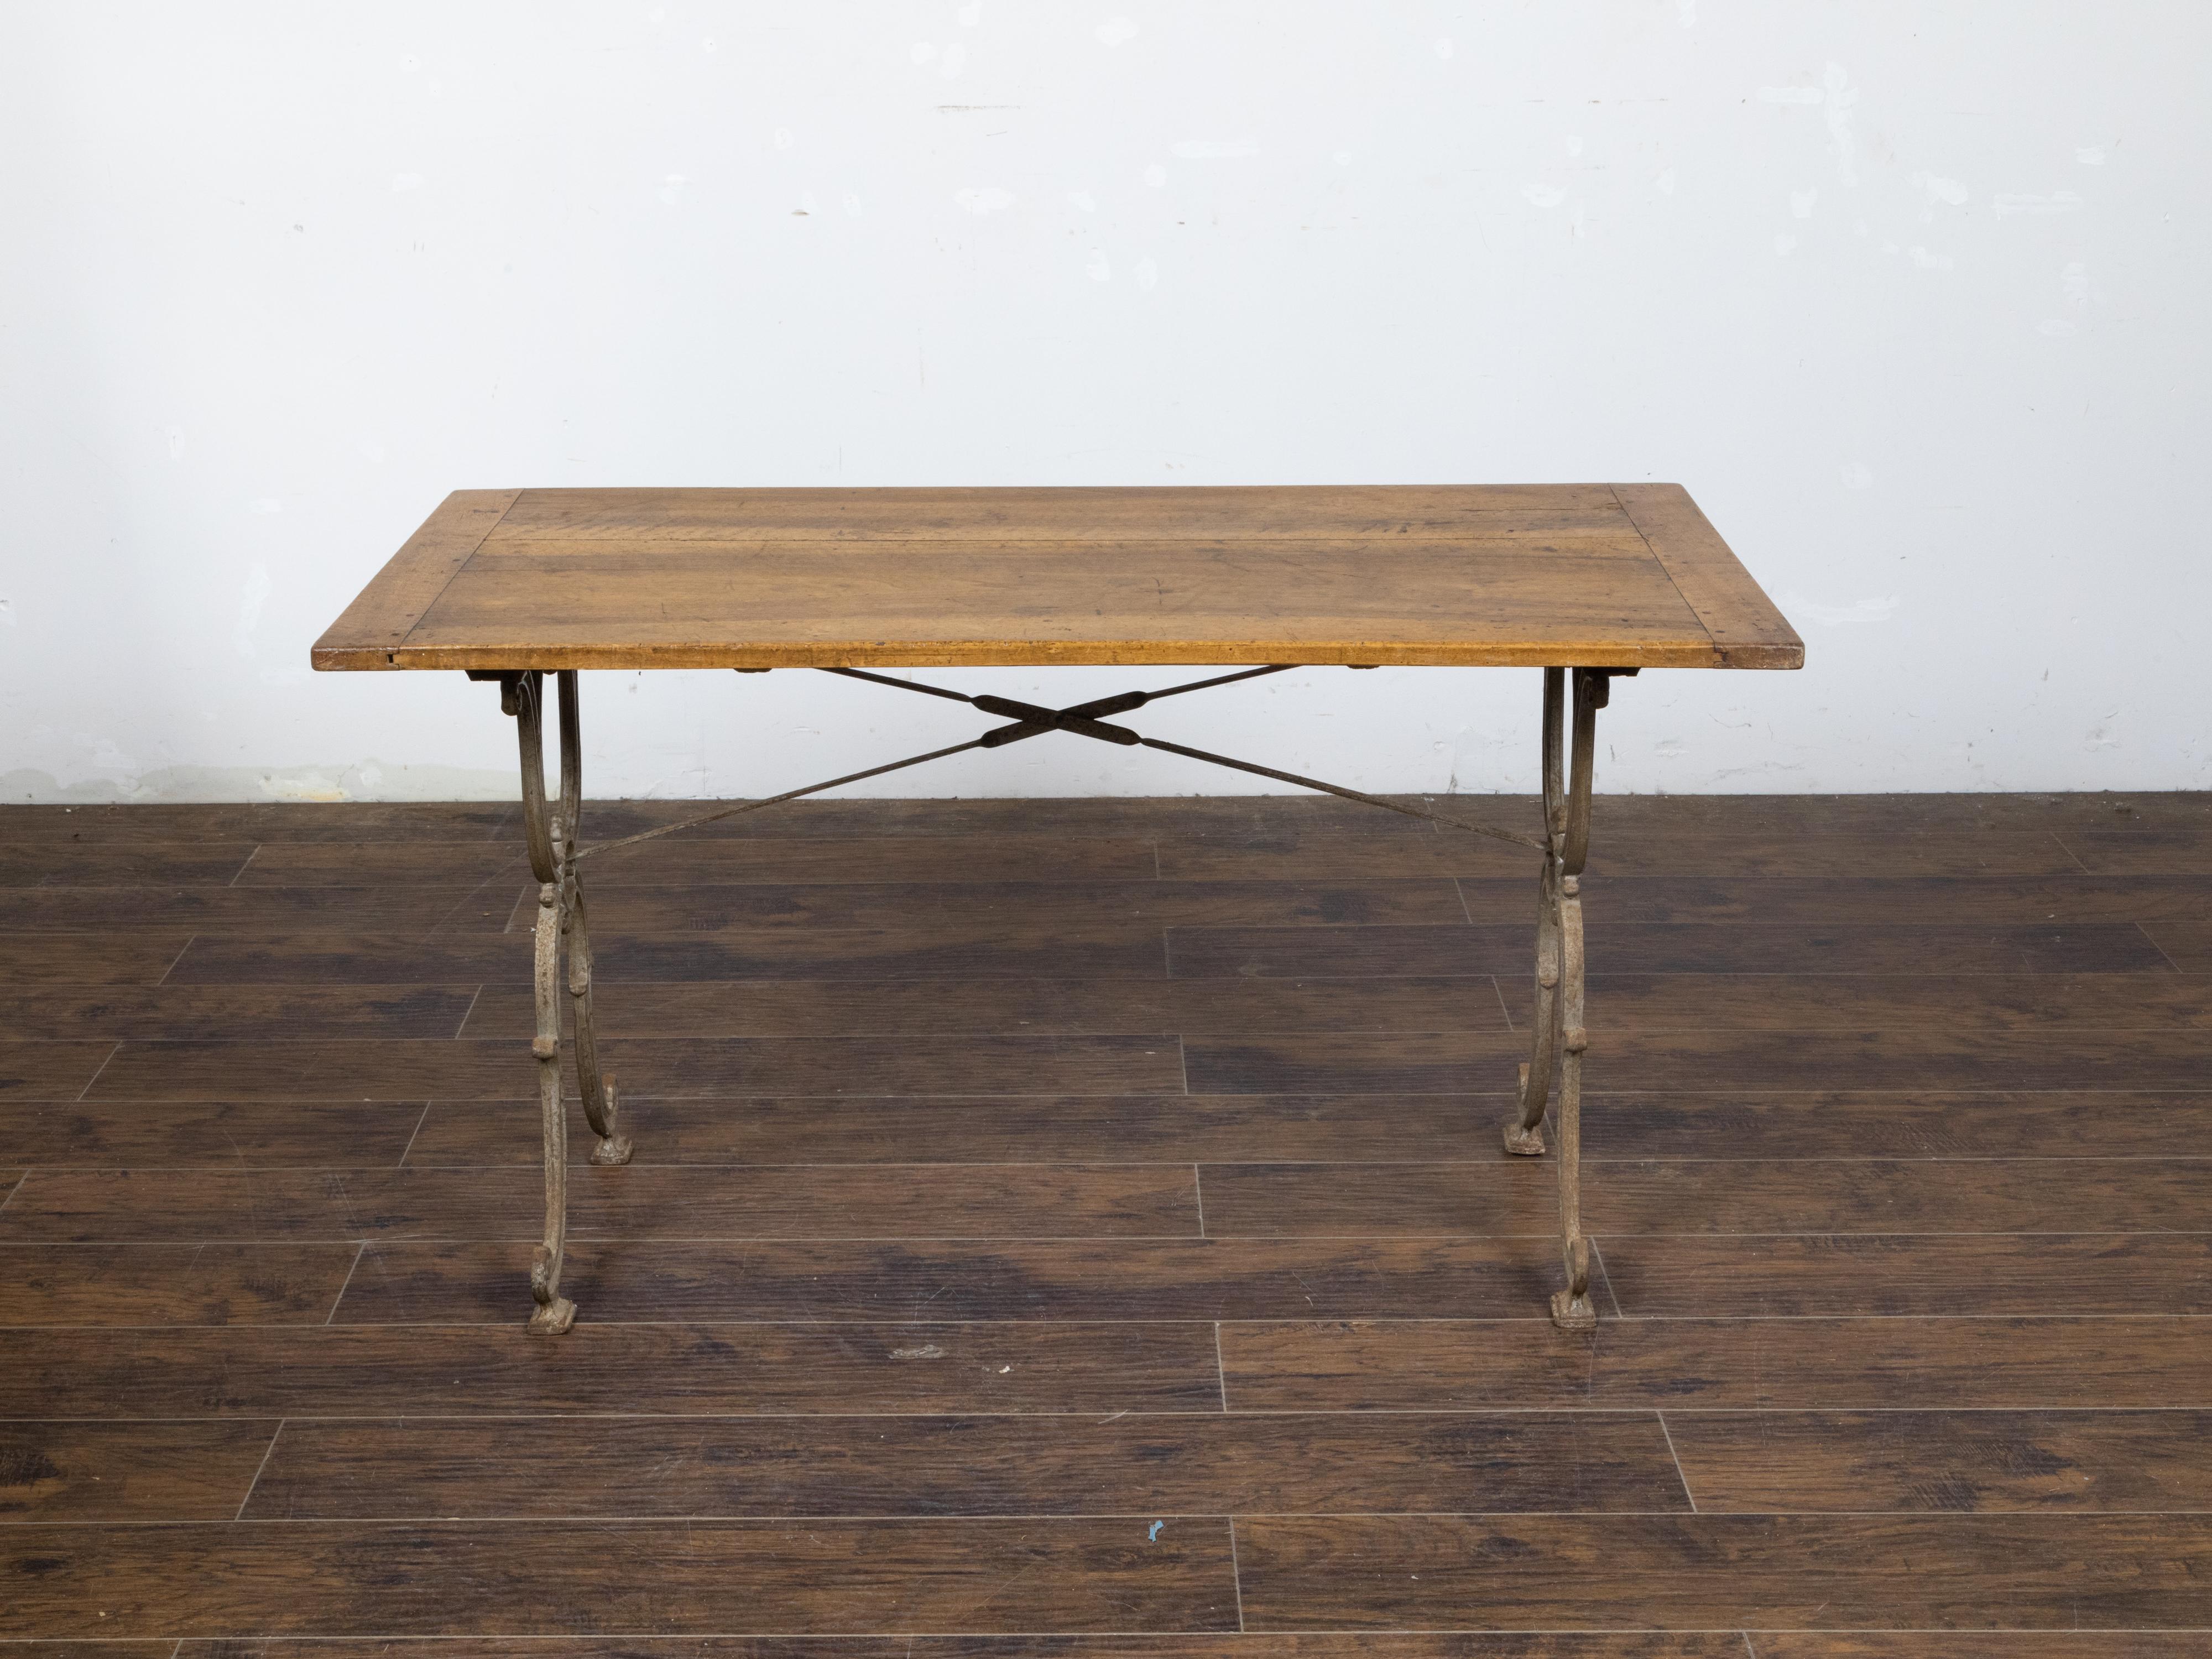 French 1900s Steel and Wood Console Table with Curving X-Form Legs and Stretcher In Good Condition For Sale In Atlanta, GA